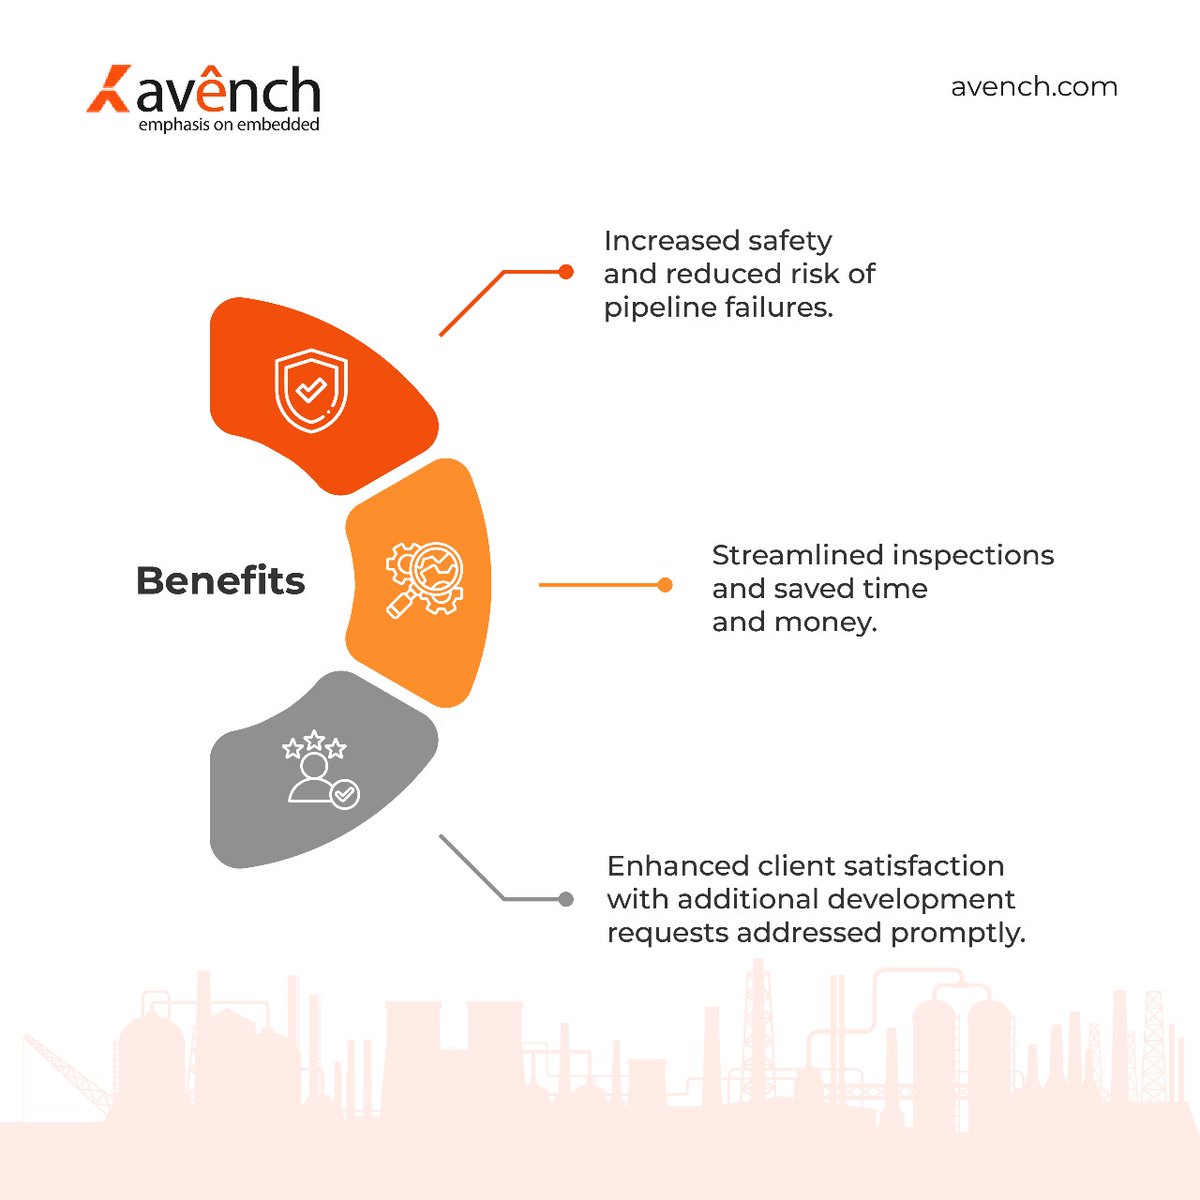 Partner with Avench for top-notch embedded systems design services. Streamline operations and ensure efficiency with our next-gen technology. Transform your business today! avench.com #avenchsystem #embeddedsystems #IOTsystem #microcontrollers #TechnologyStrategy